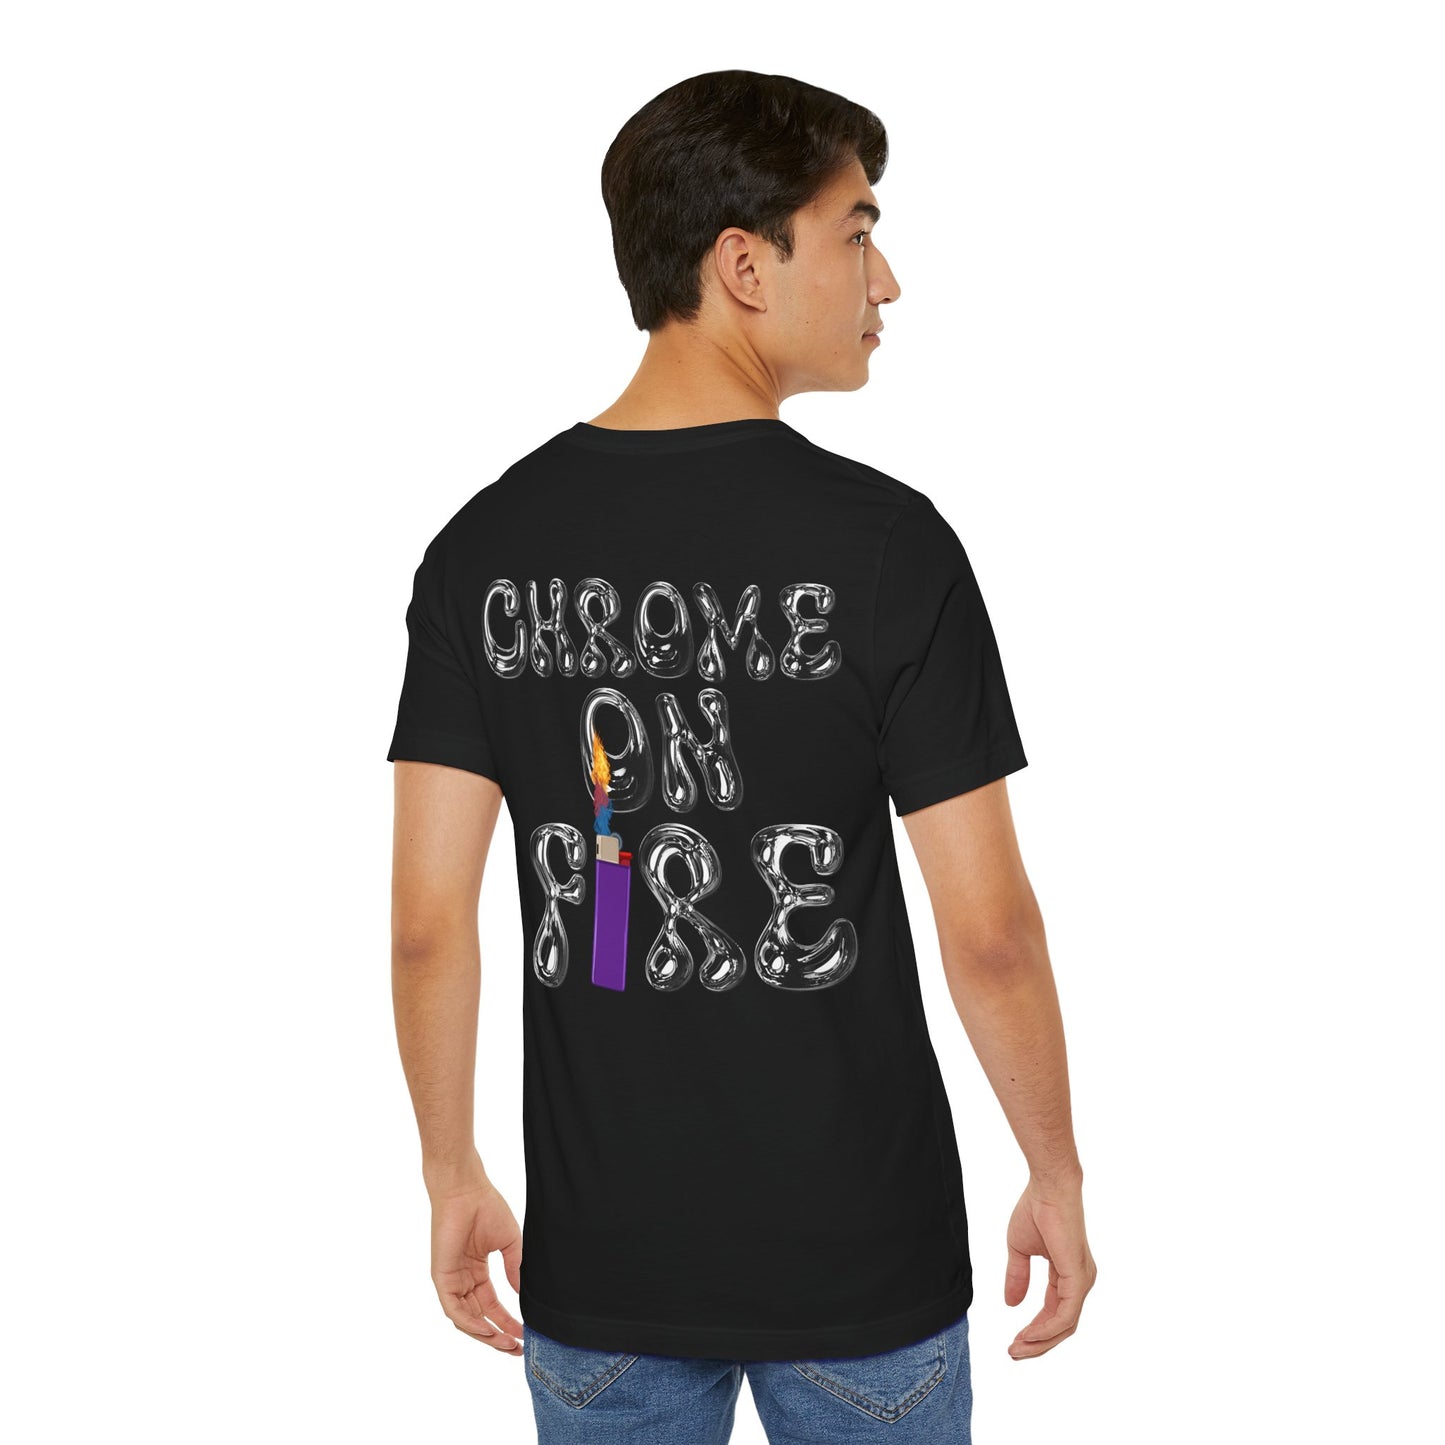 "CHROME ON FIRE" Graphic T-Shirt